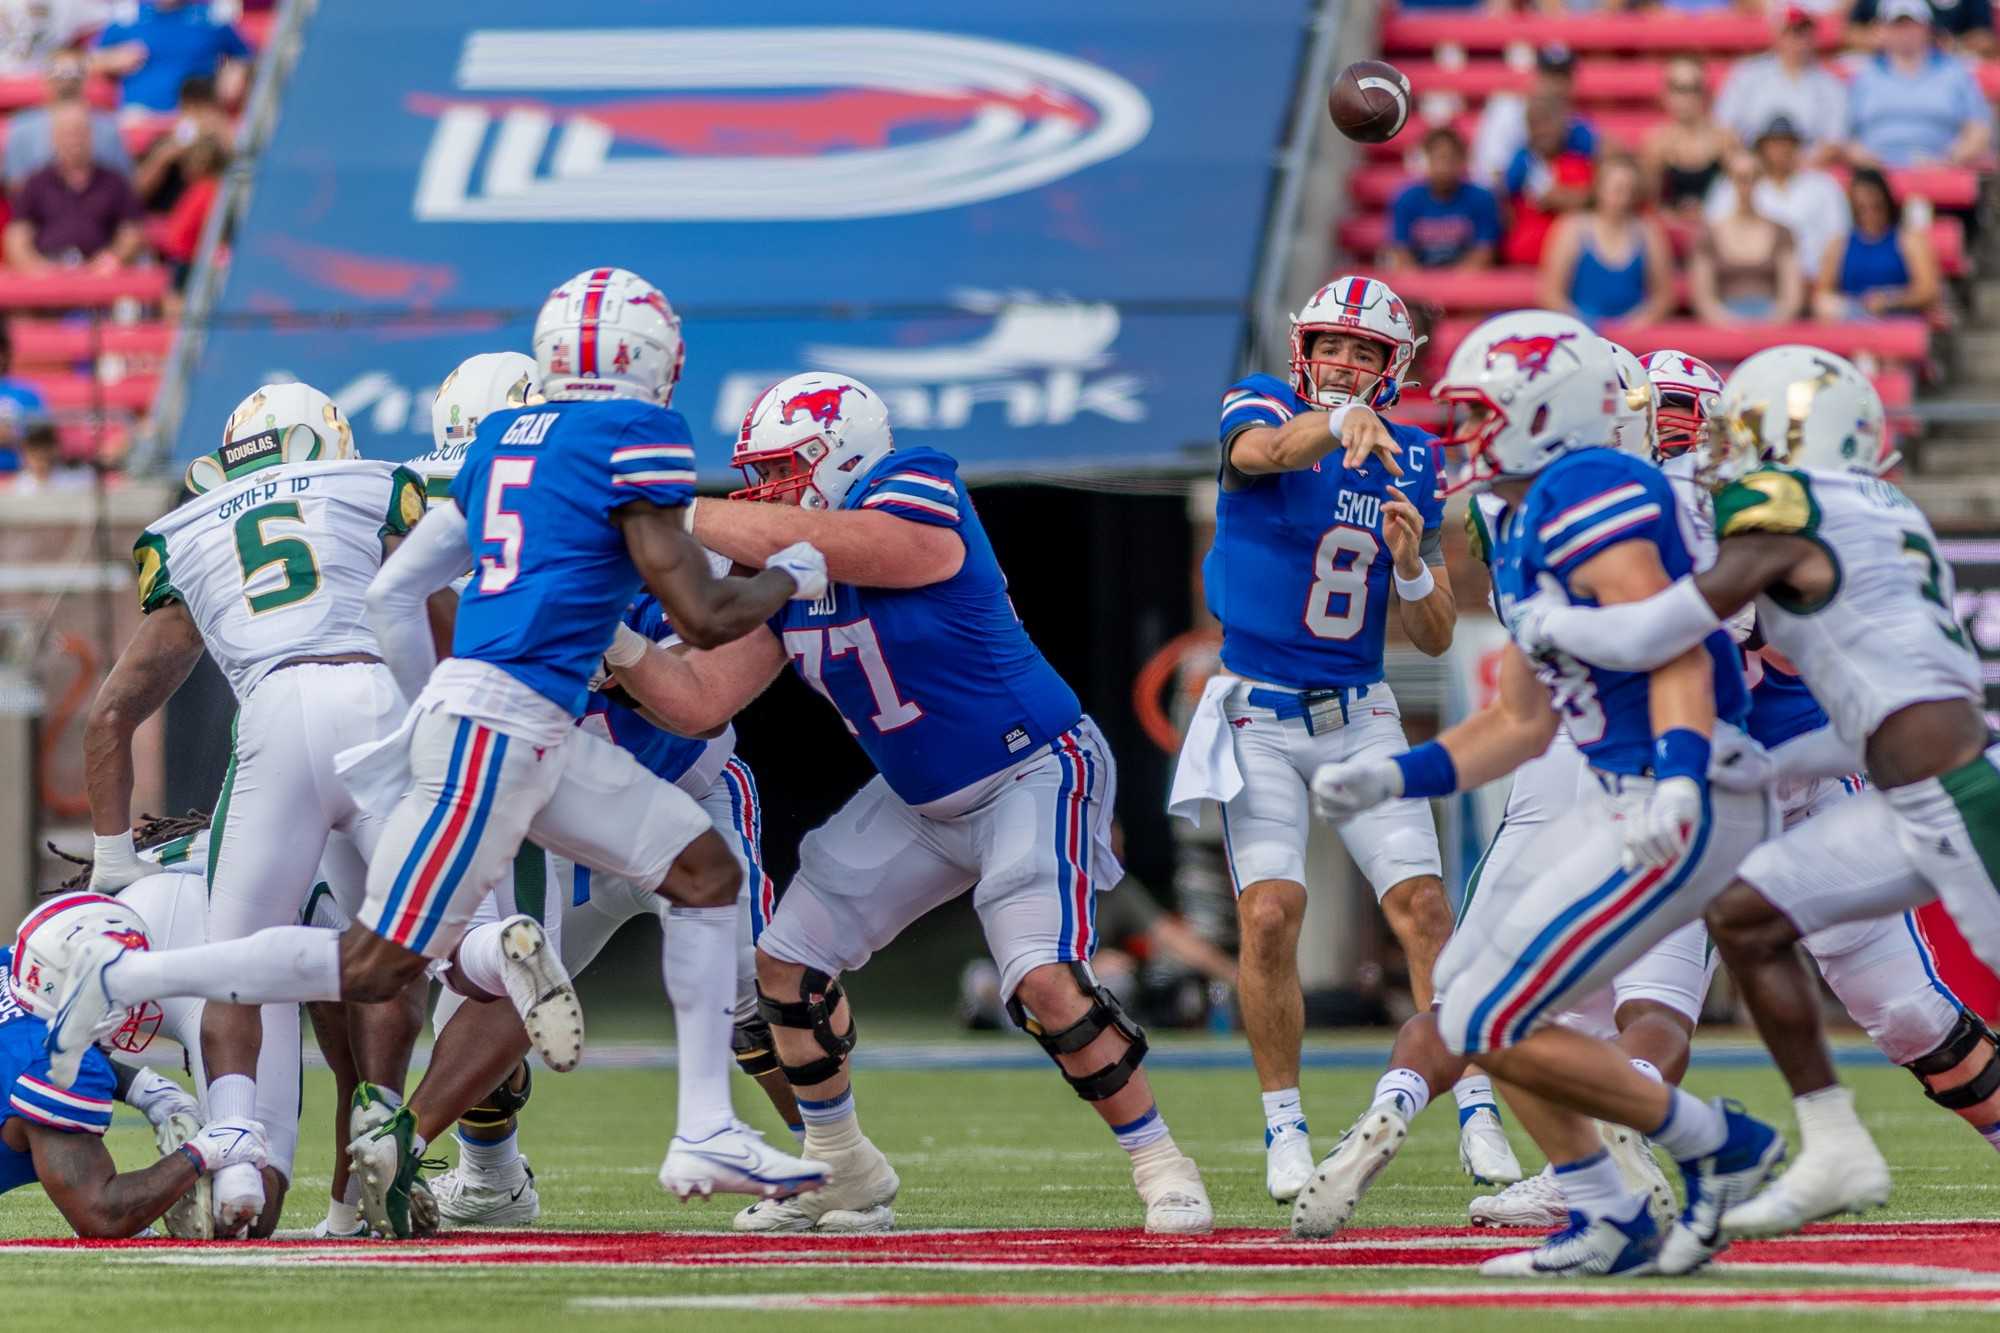 SMU moves up to No. 21 in AP Top 25 after bye week